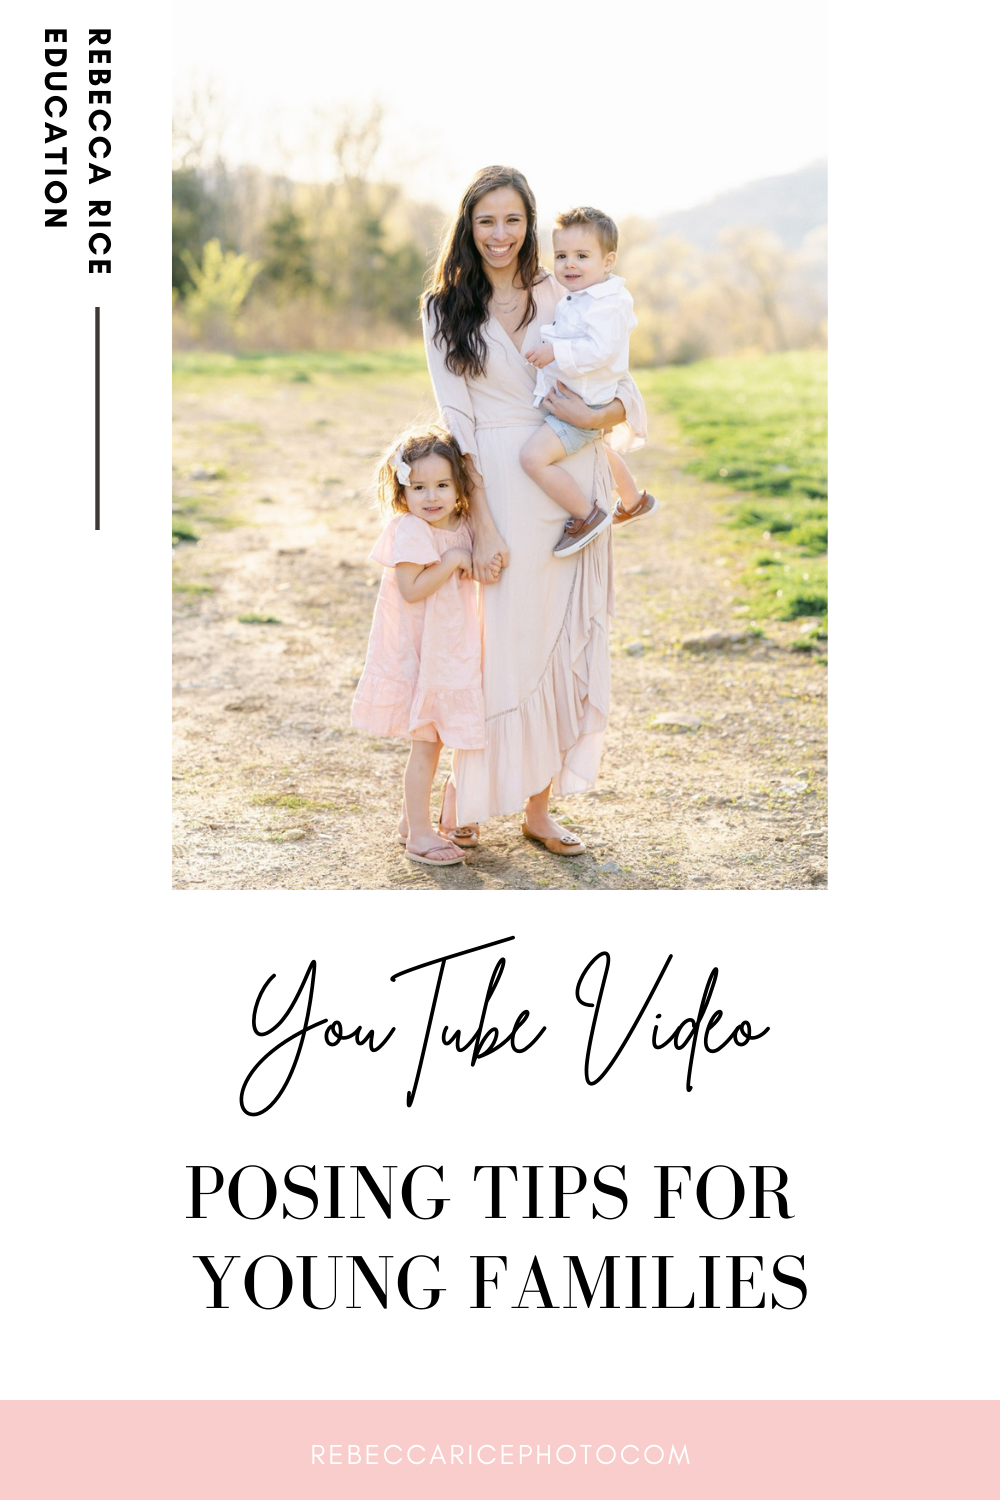 Posing Tips for Young Families